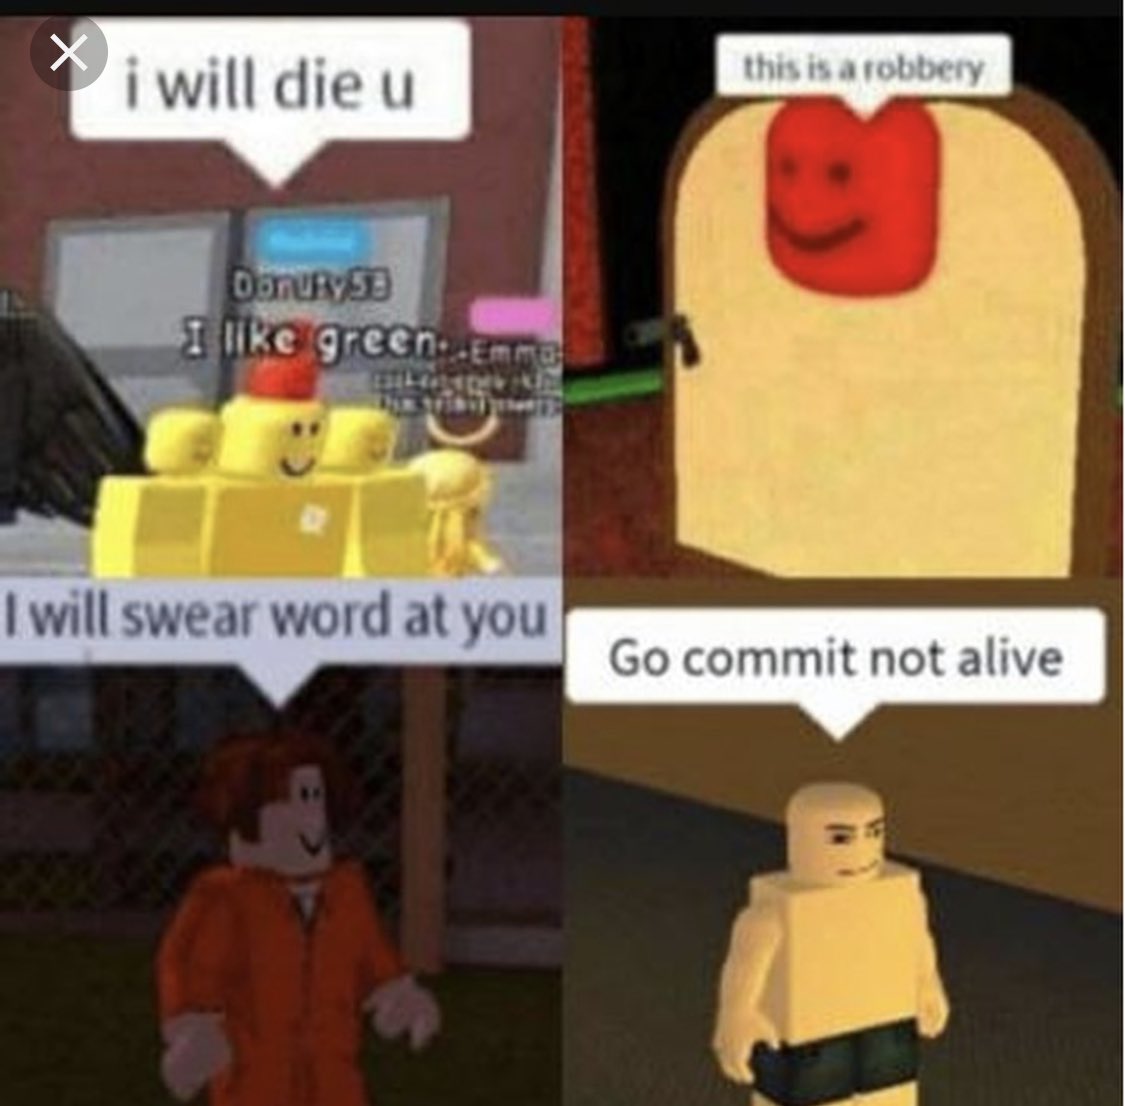 Roblox Swear Words 2019 Rblx Gg Sigh Up - will swear word at you roblox go commit not alive ro lox 隽